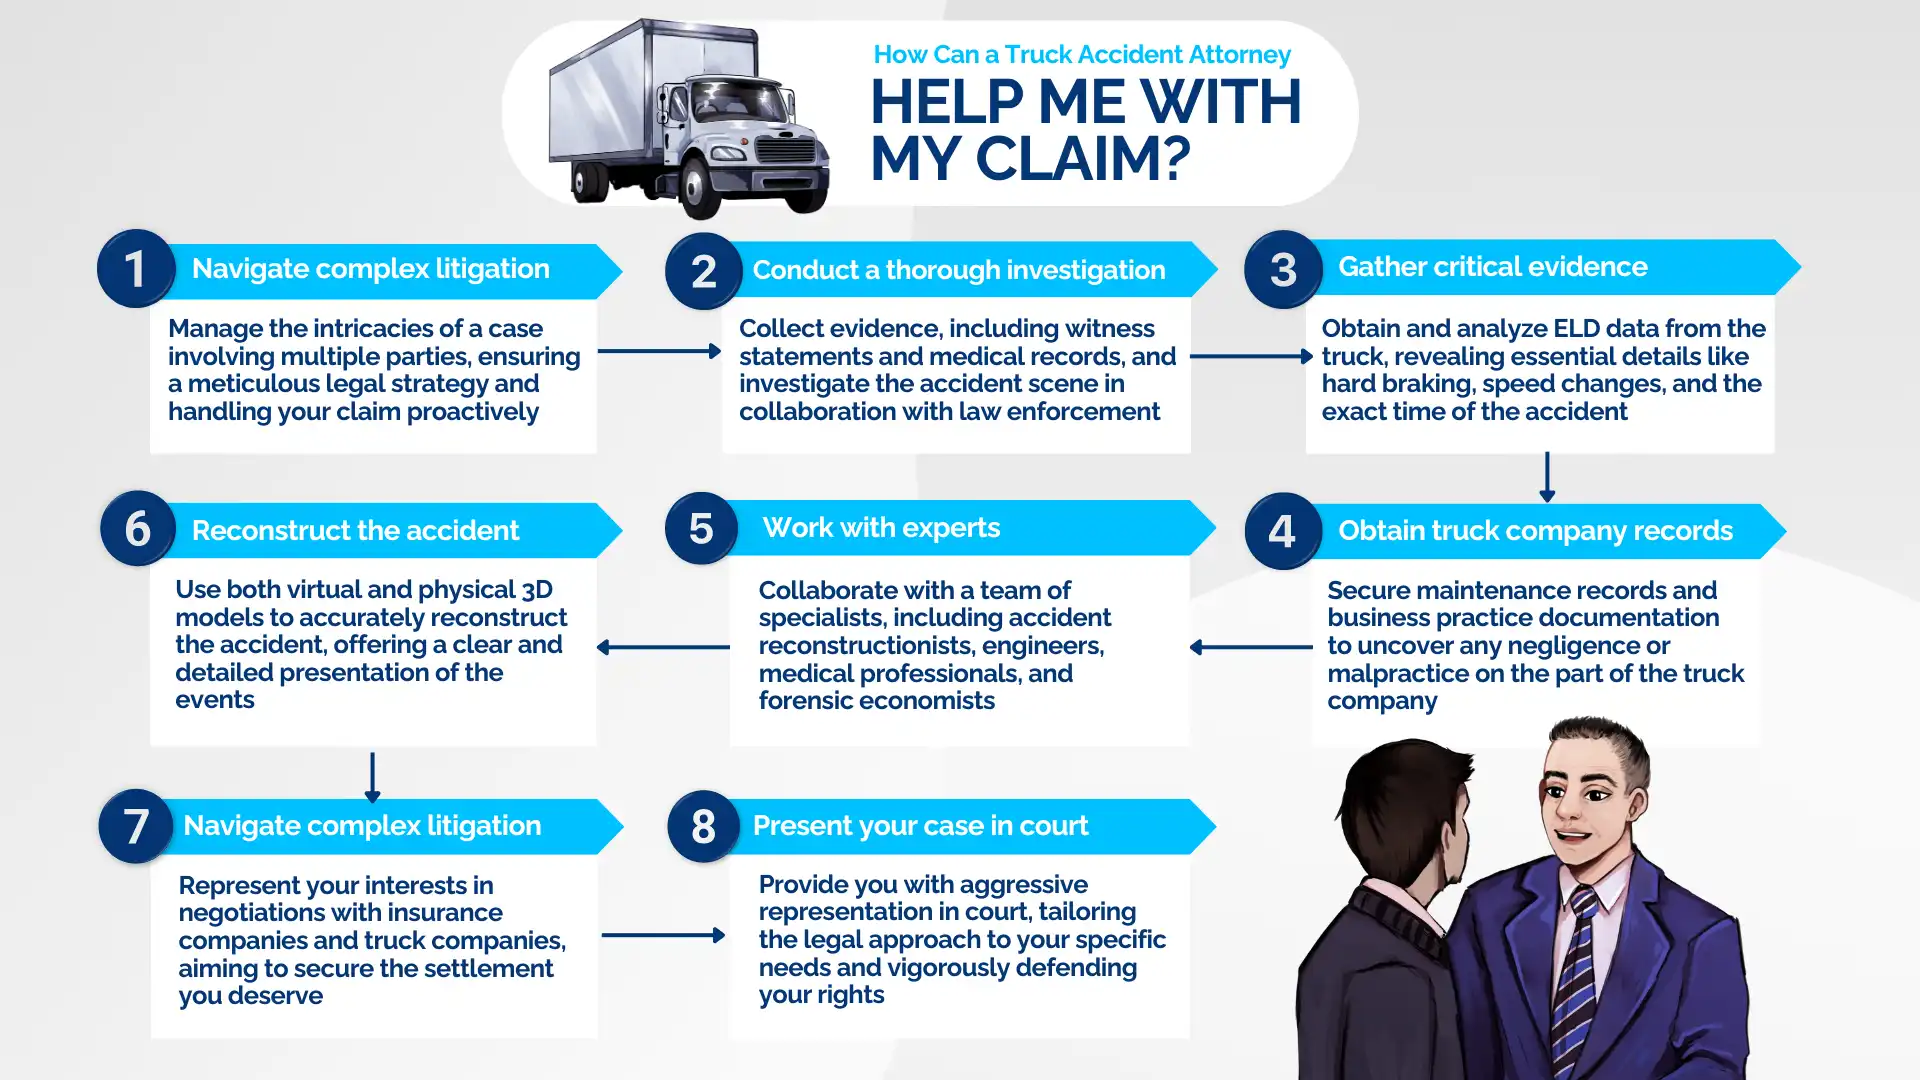 Schematic depicting the ways in which a truck accident attorney can help with a claim. An illustration in the bottom right shows a truck accident attorney speaking with an inquiring client